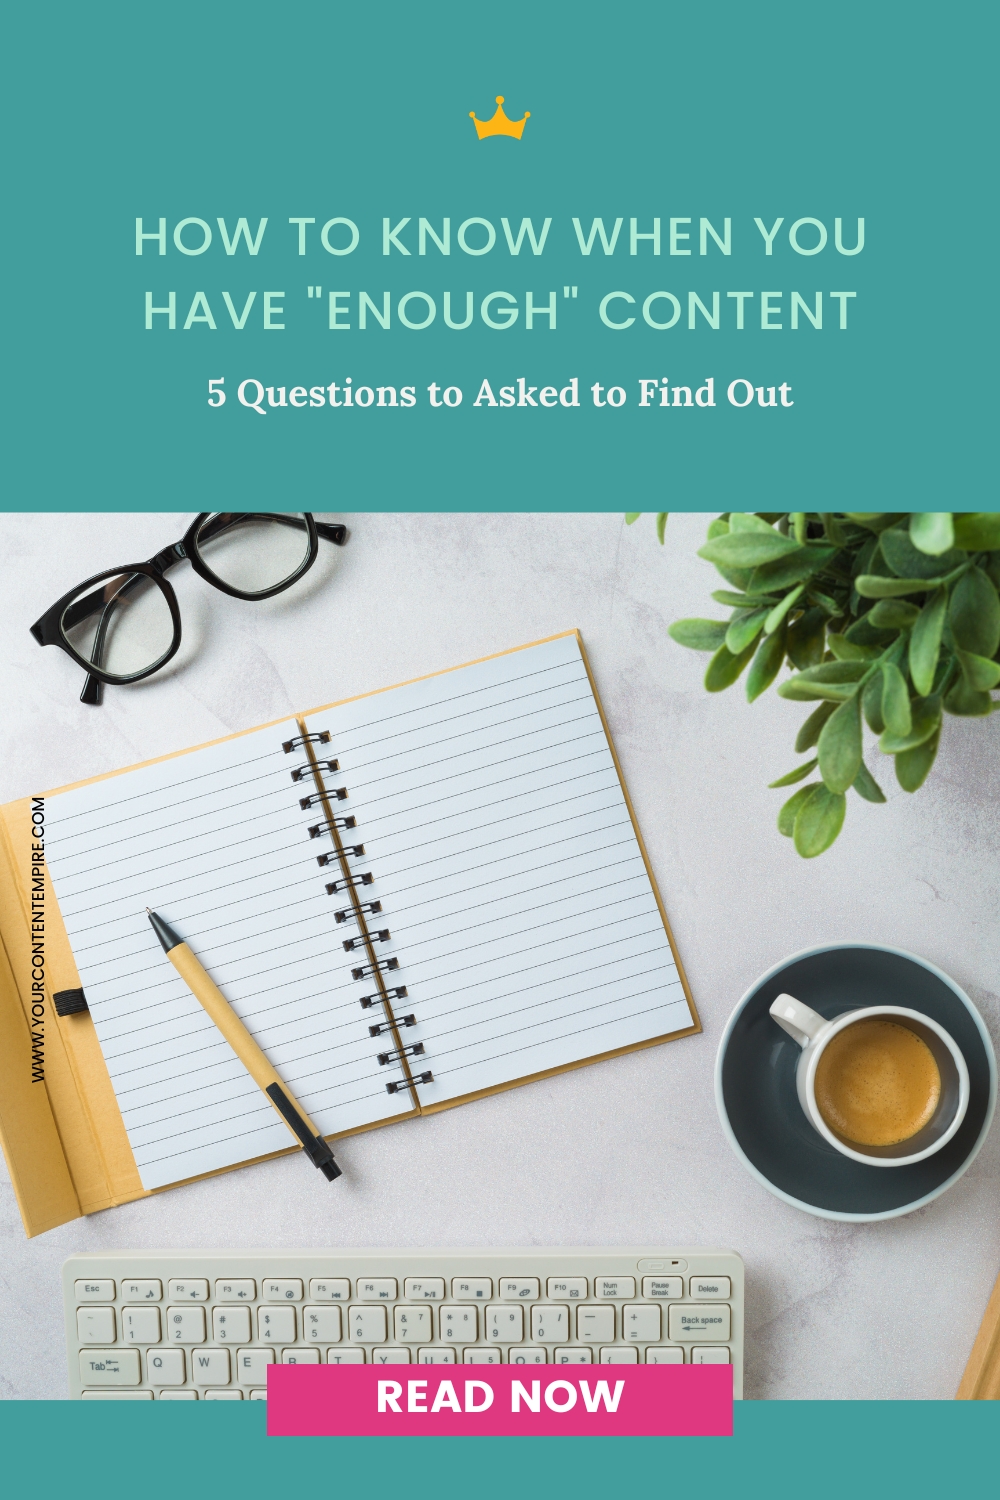 5 Questions to Know If You Have "Enough" Content by Your Content Empire